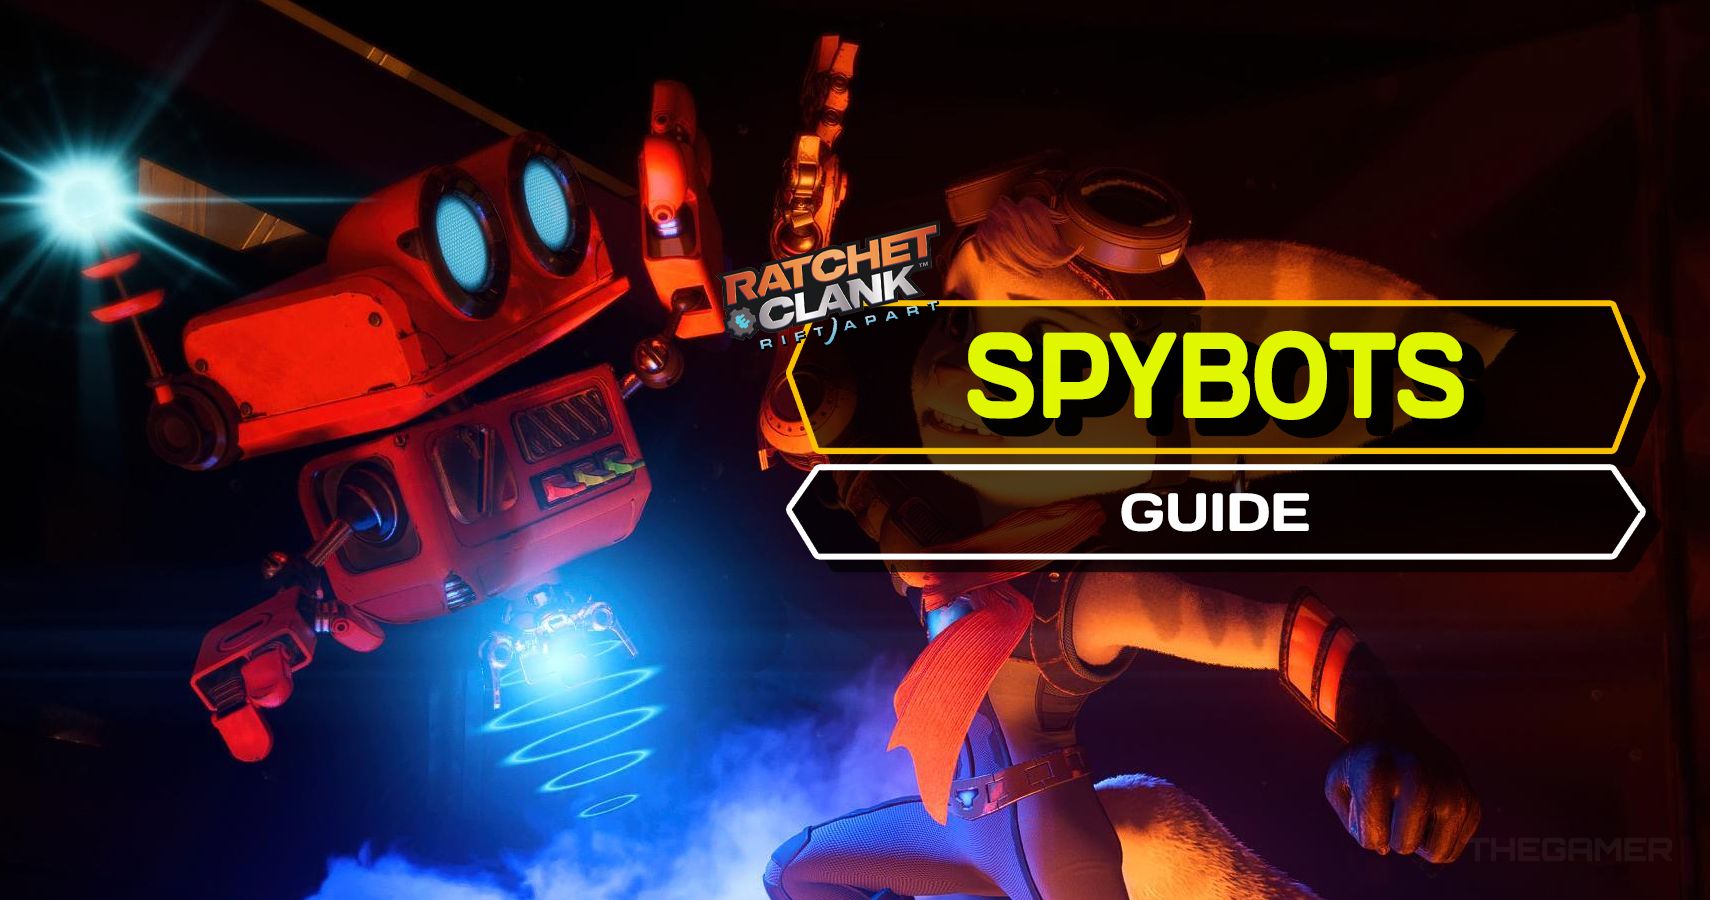 Ratchet and Clank Rift Apart Spybots Guide